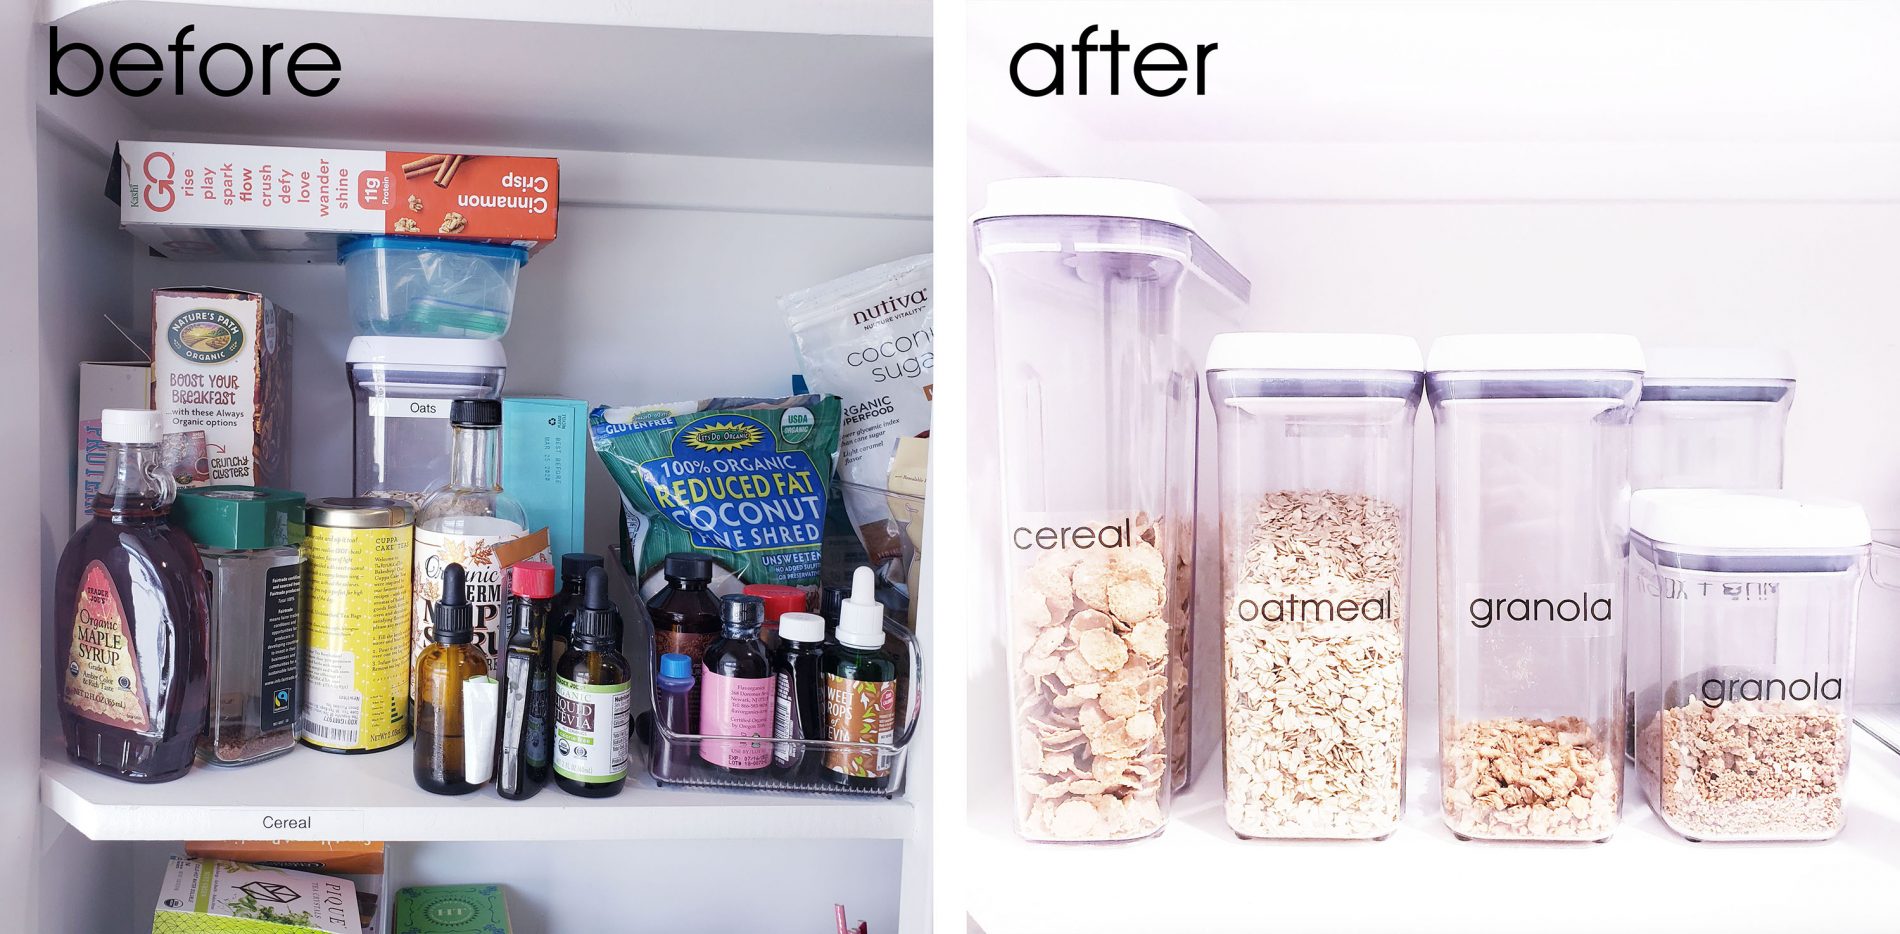 Before and after photos of a kitchen pantry.